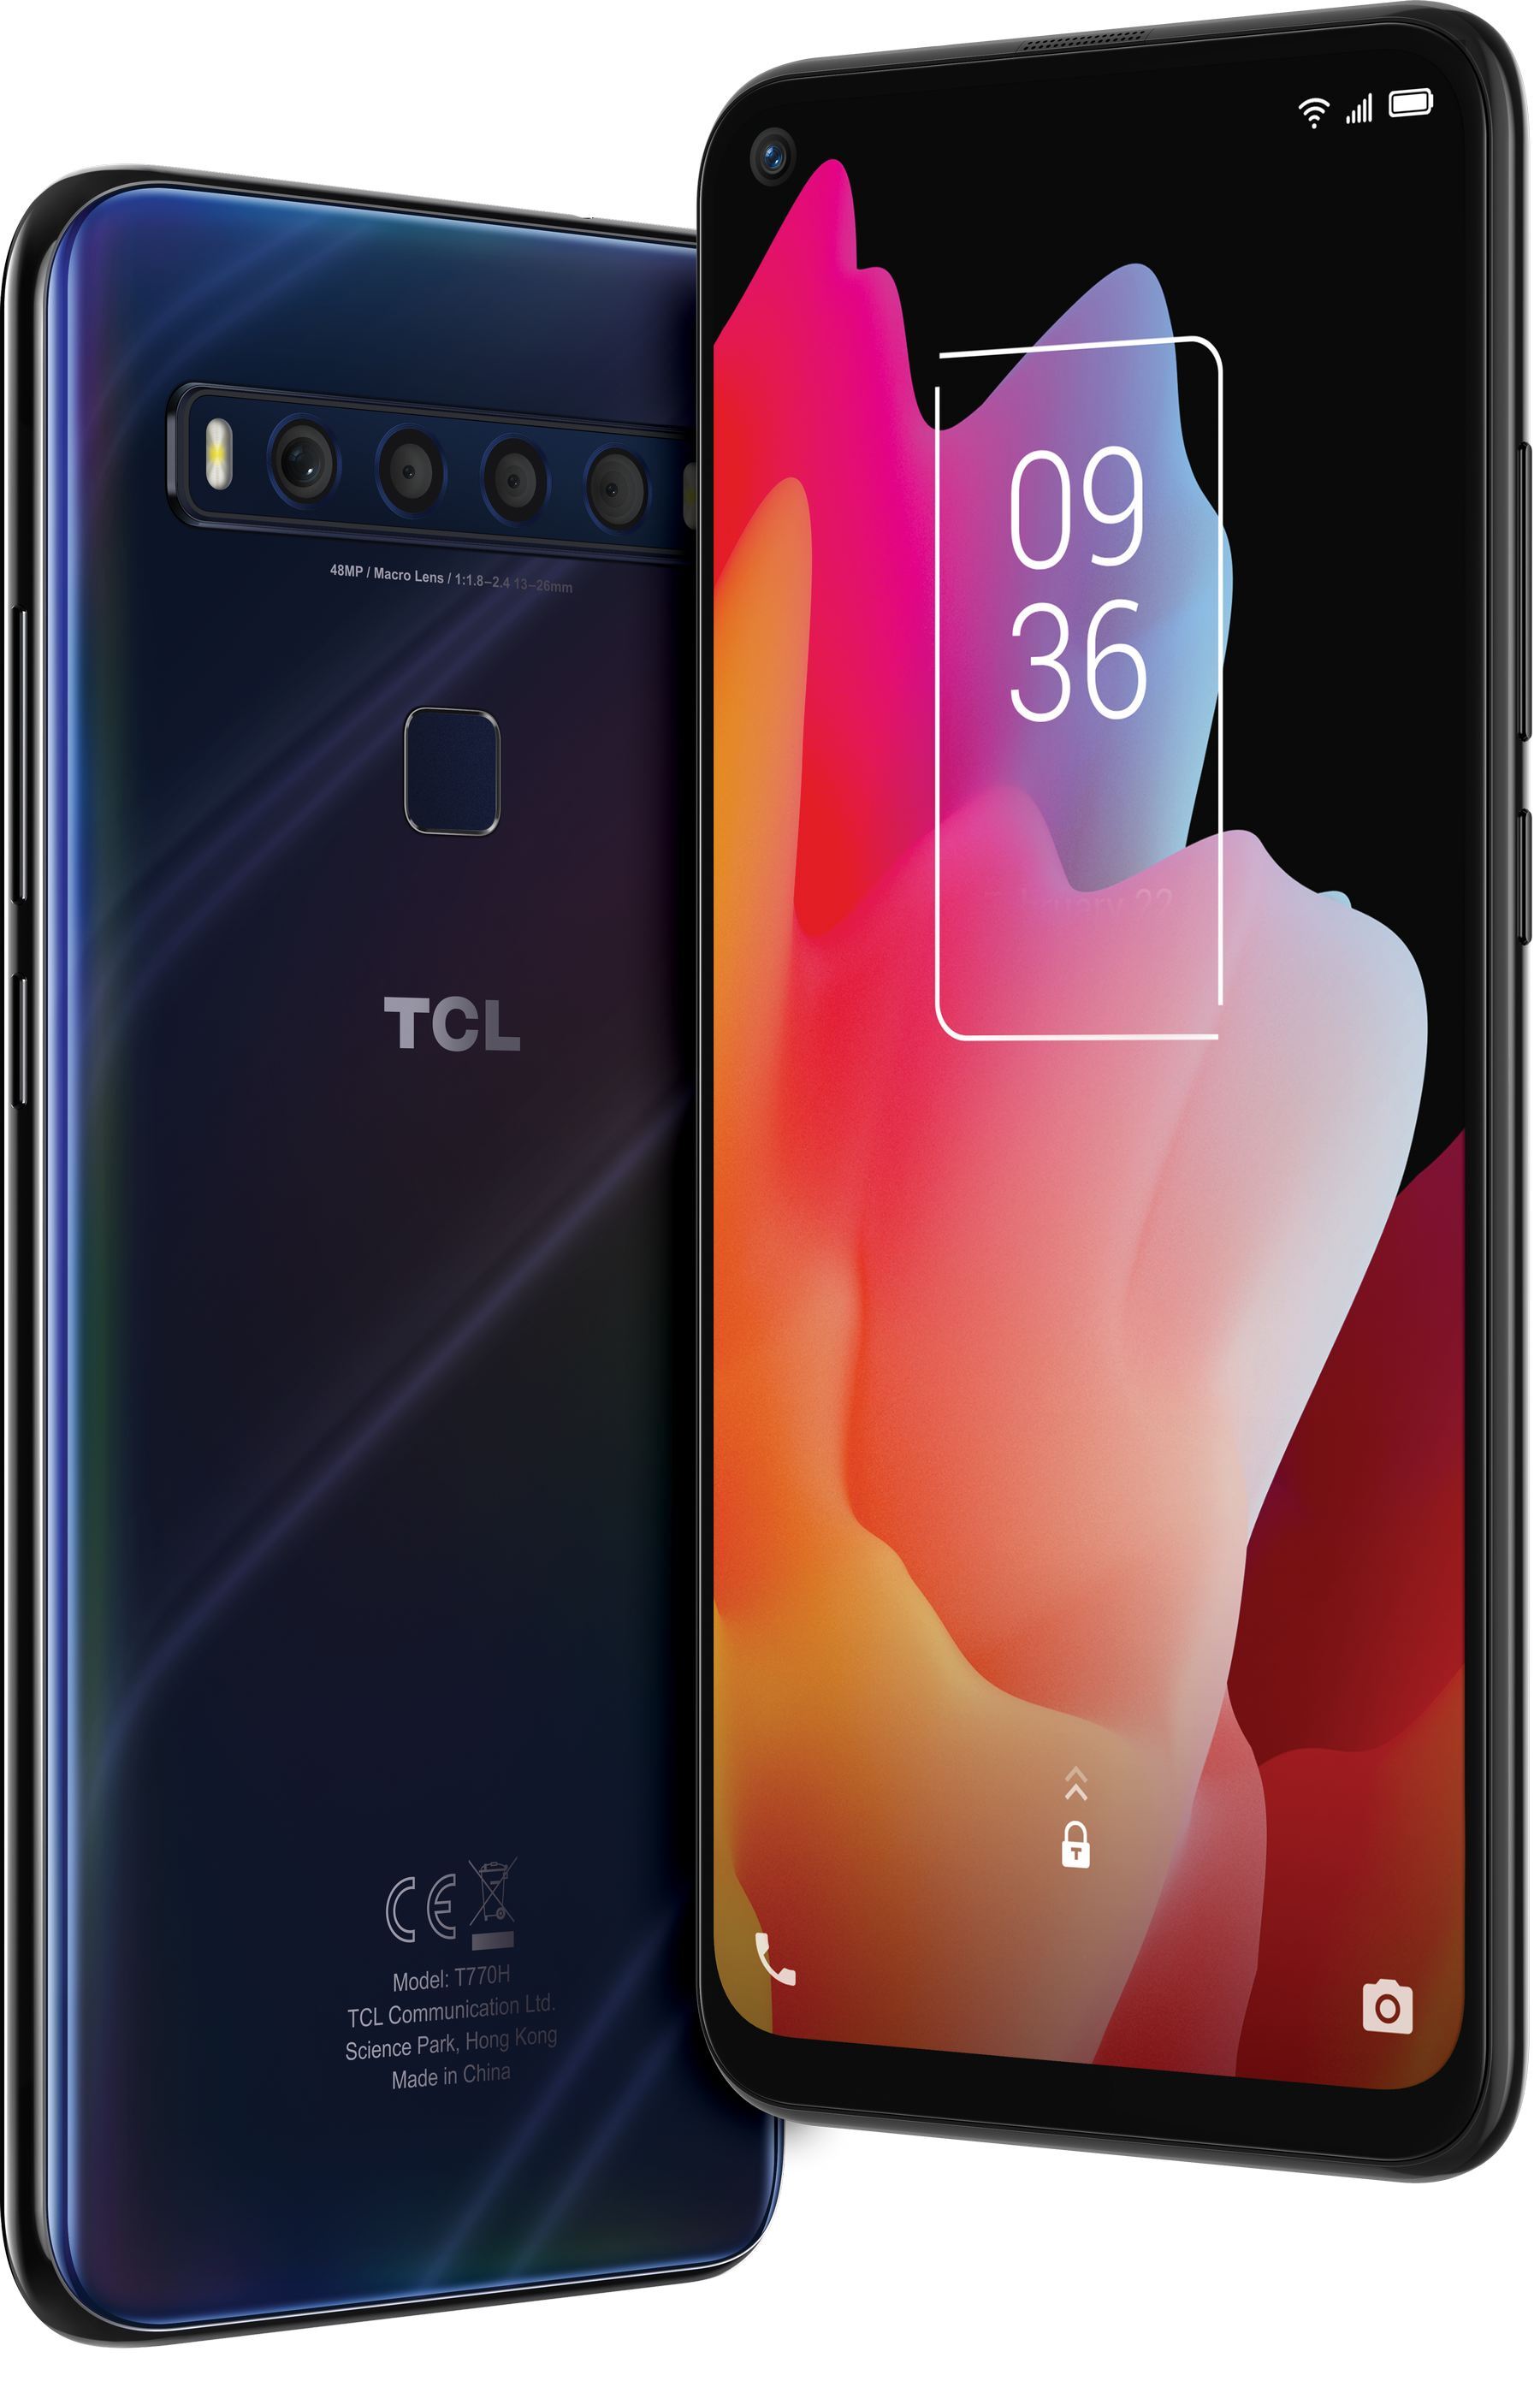 TCL 10L - TCL's new phones are very affordable and are coming to the US very soon